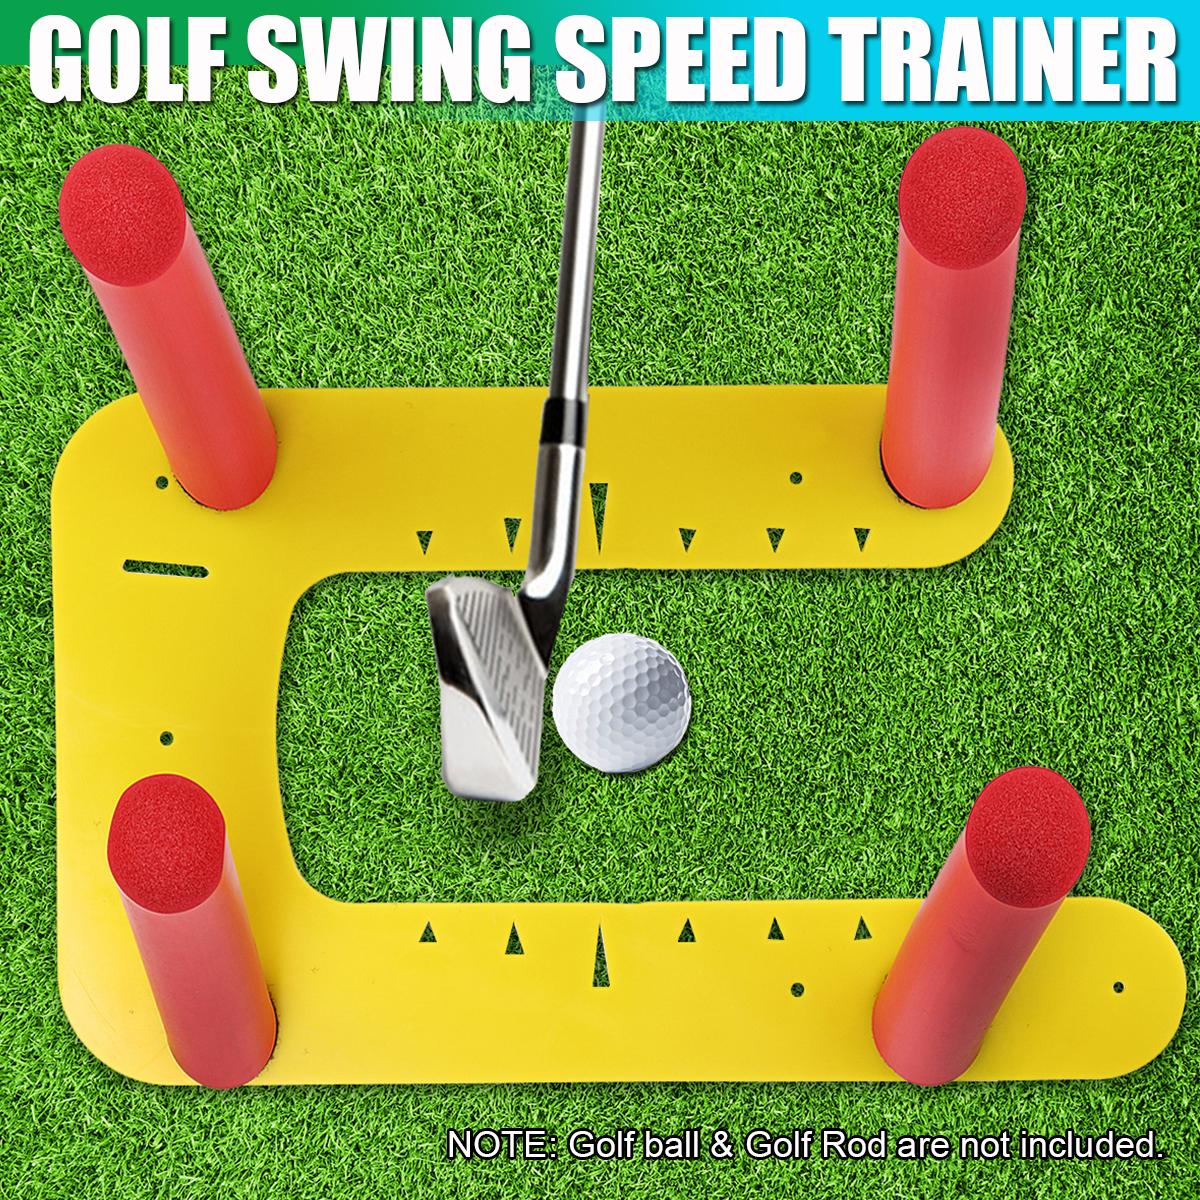 Golf Swing Putter Trainer Pro Speed Trap Base Aid 4 Rods Hitting Practice Golf